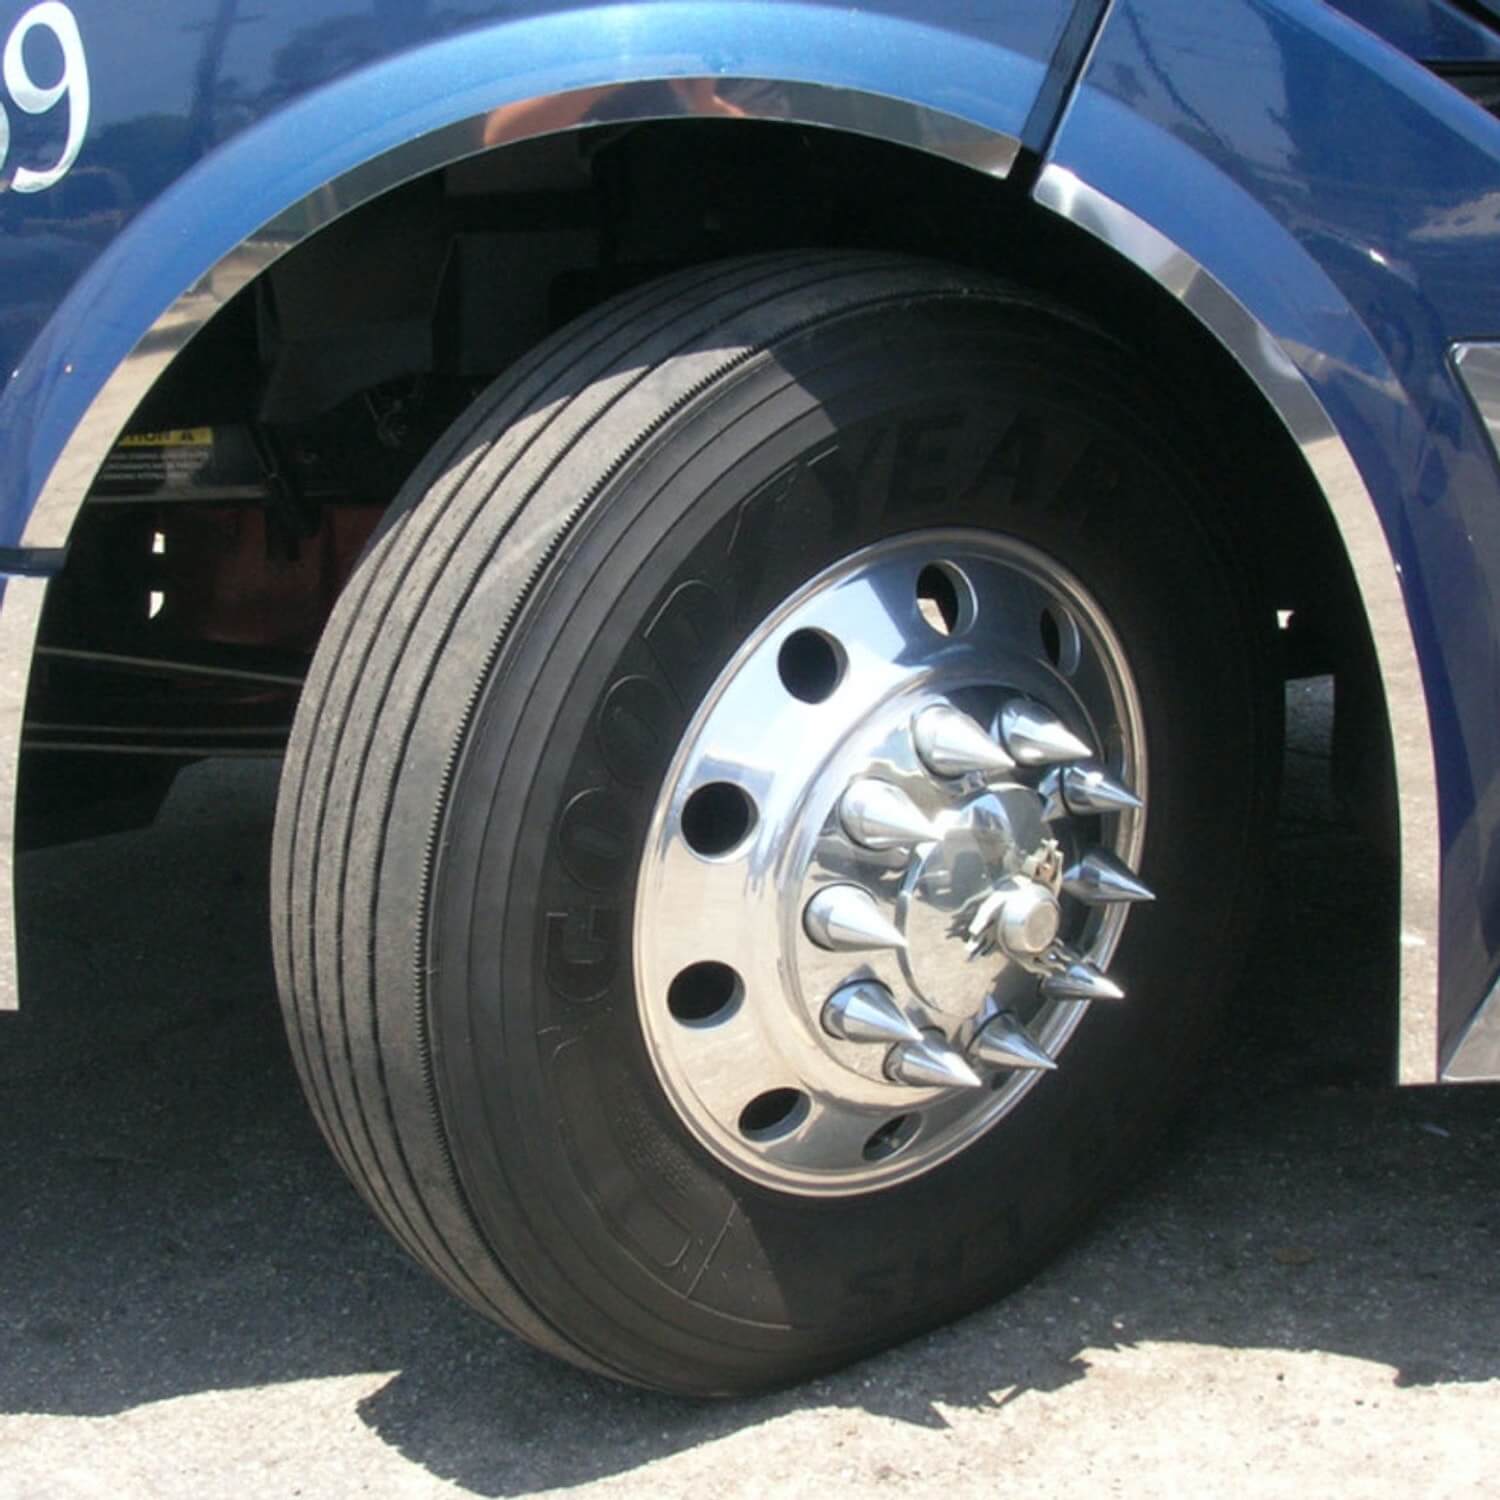 Closeup of the spiked lug nut covers on a semi truck.